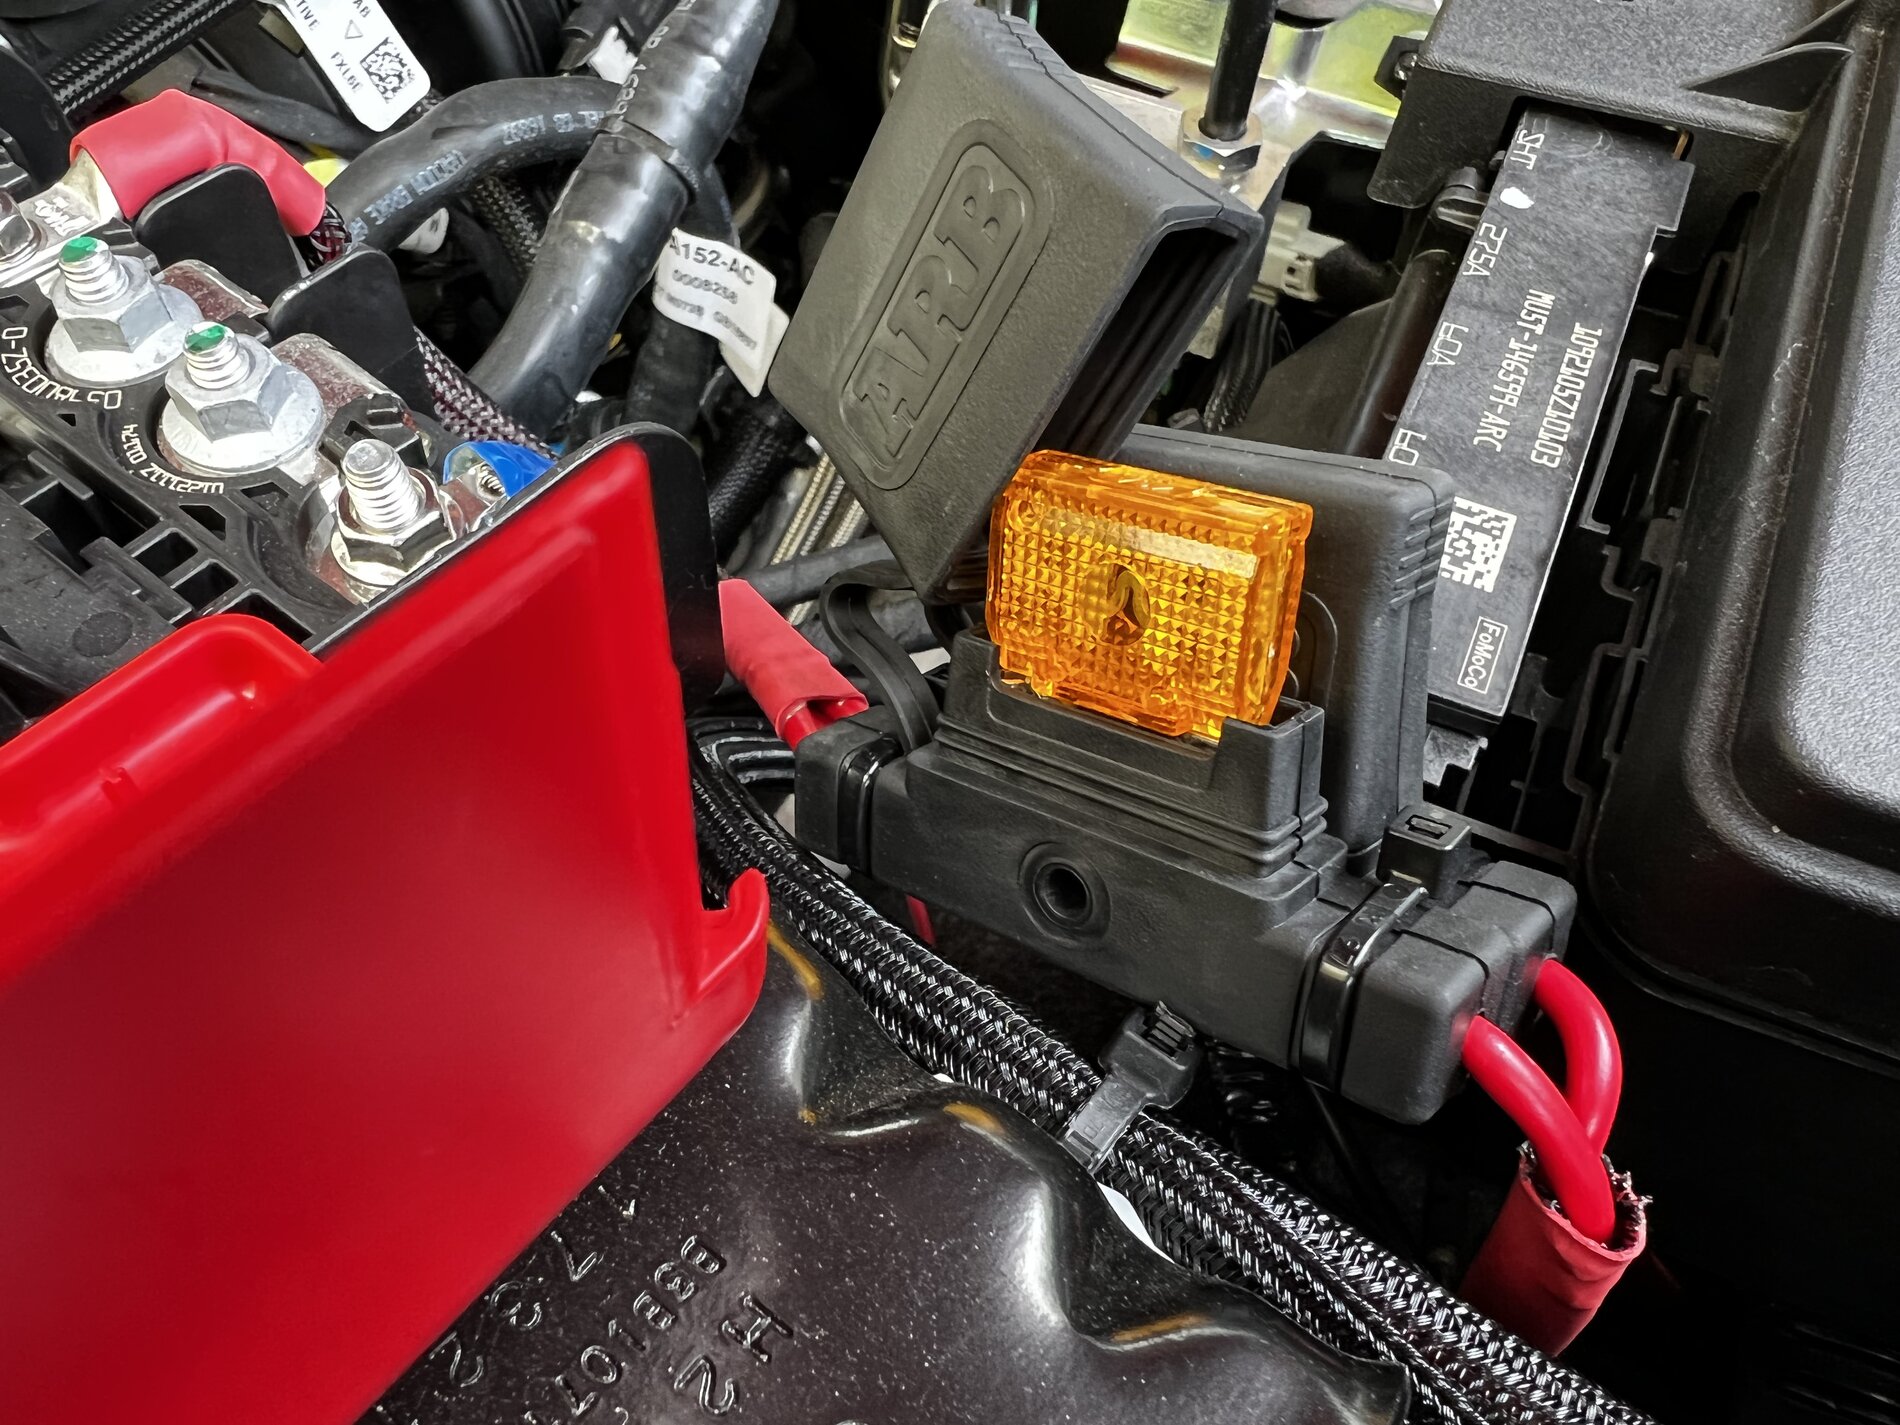 Ford Bronco Hardmounted ARB dual compressor with quick connect port installed 28494F82-381F-4315-9E2B-248B642E6A62